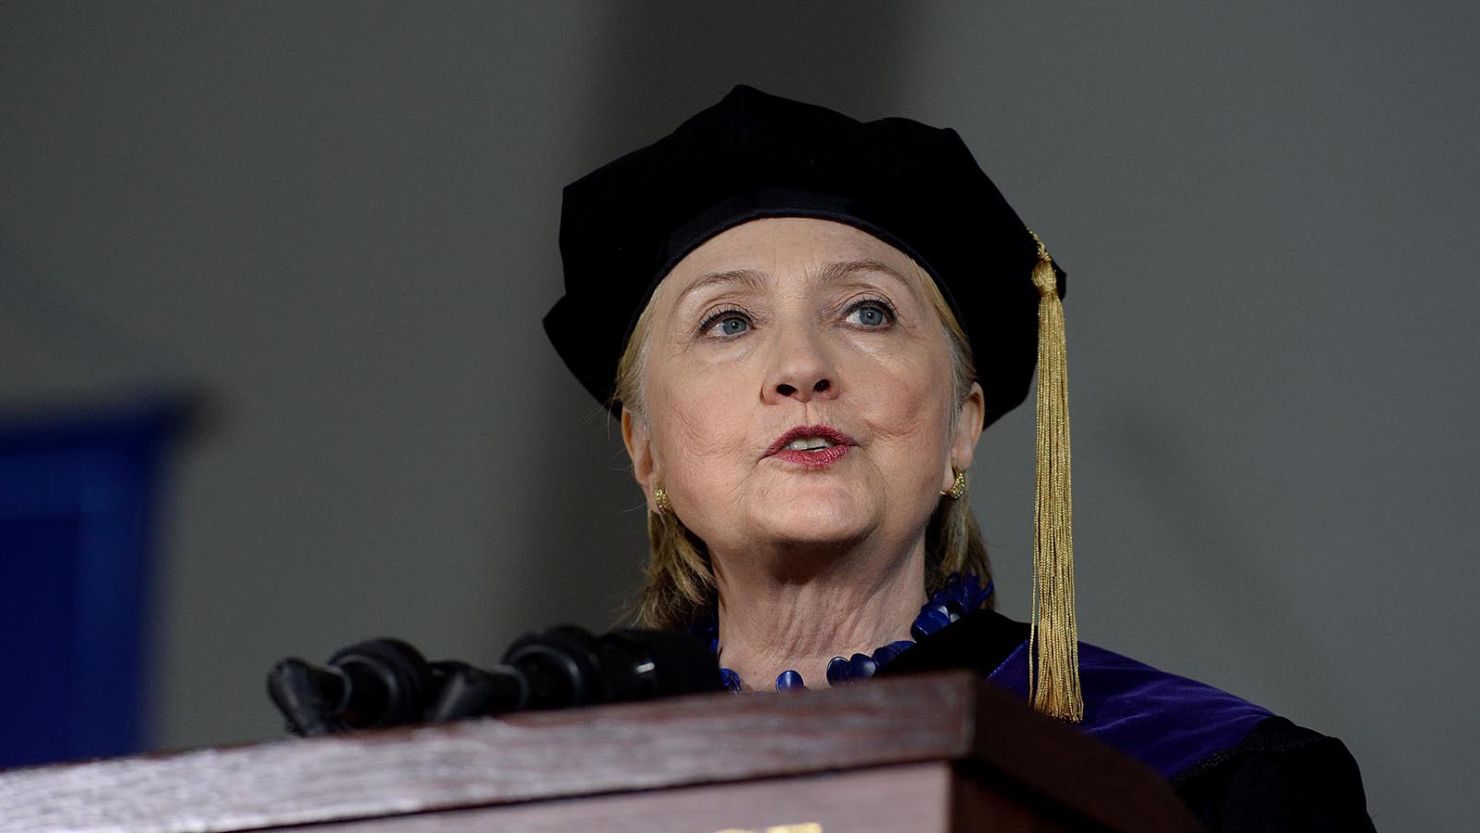 Hillary Clinton speaks at commencement at Wellesley College May 26, 2017, in Wellesley, Massachusetts.